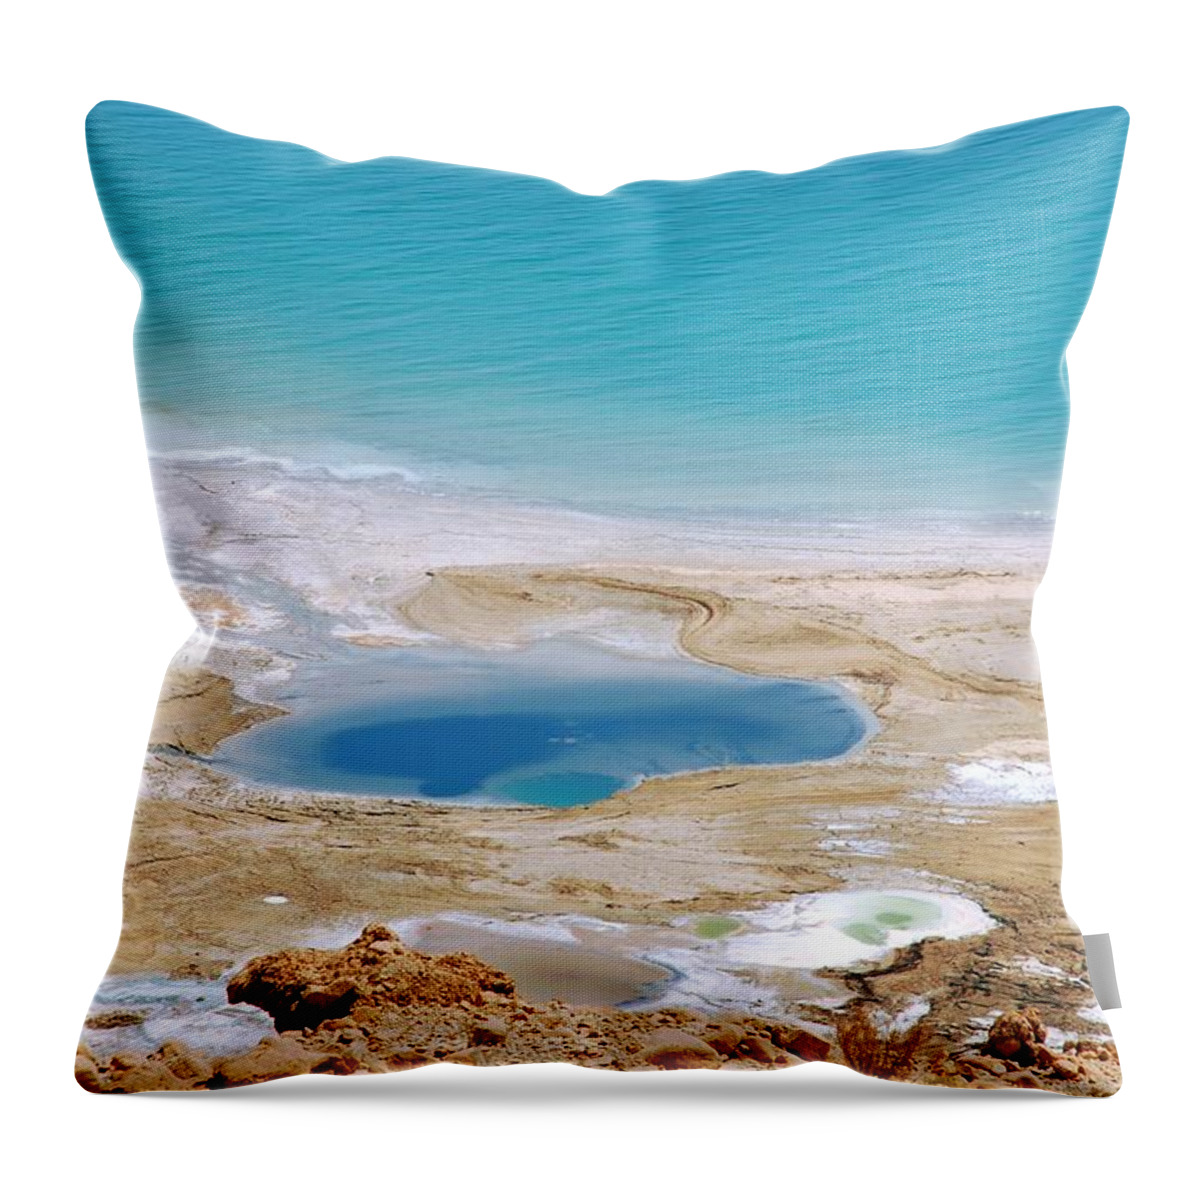 Tranquility Throw Pillow featuring the photograph Dead Sea Shoreline by Or Hiltch